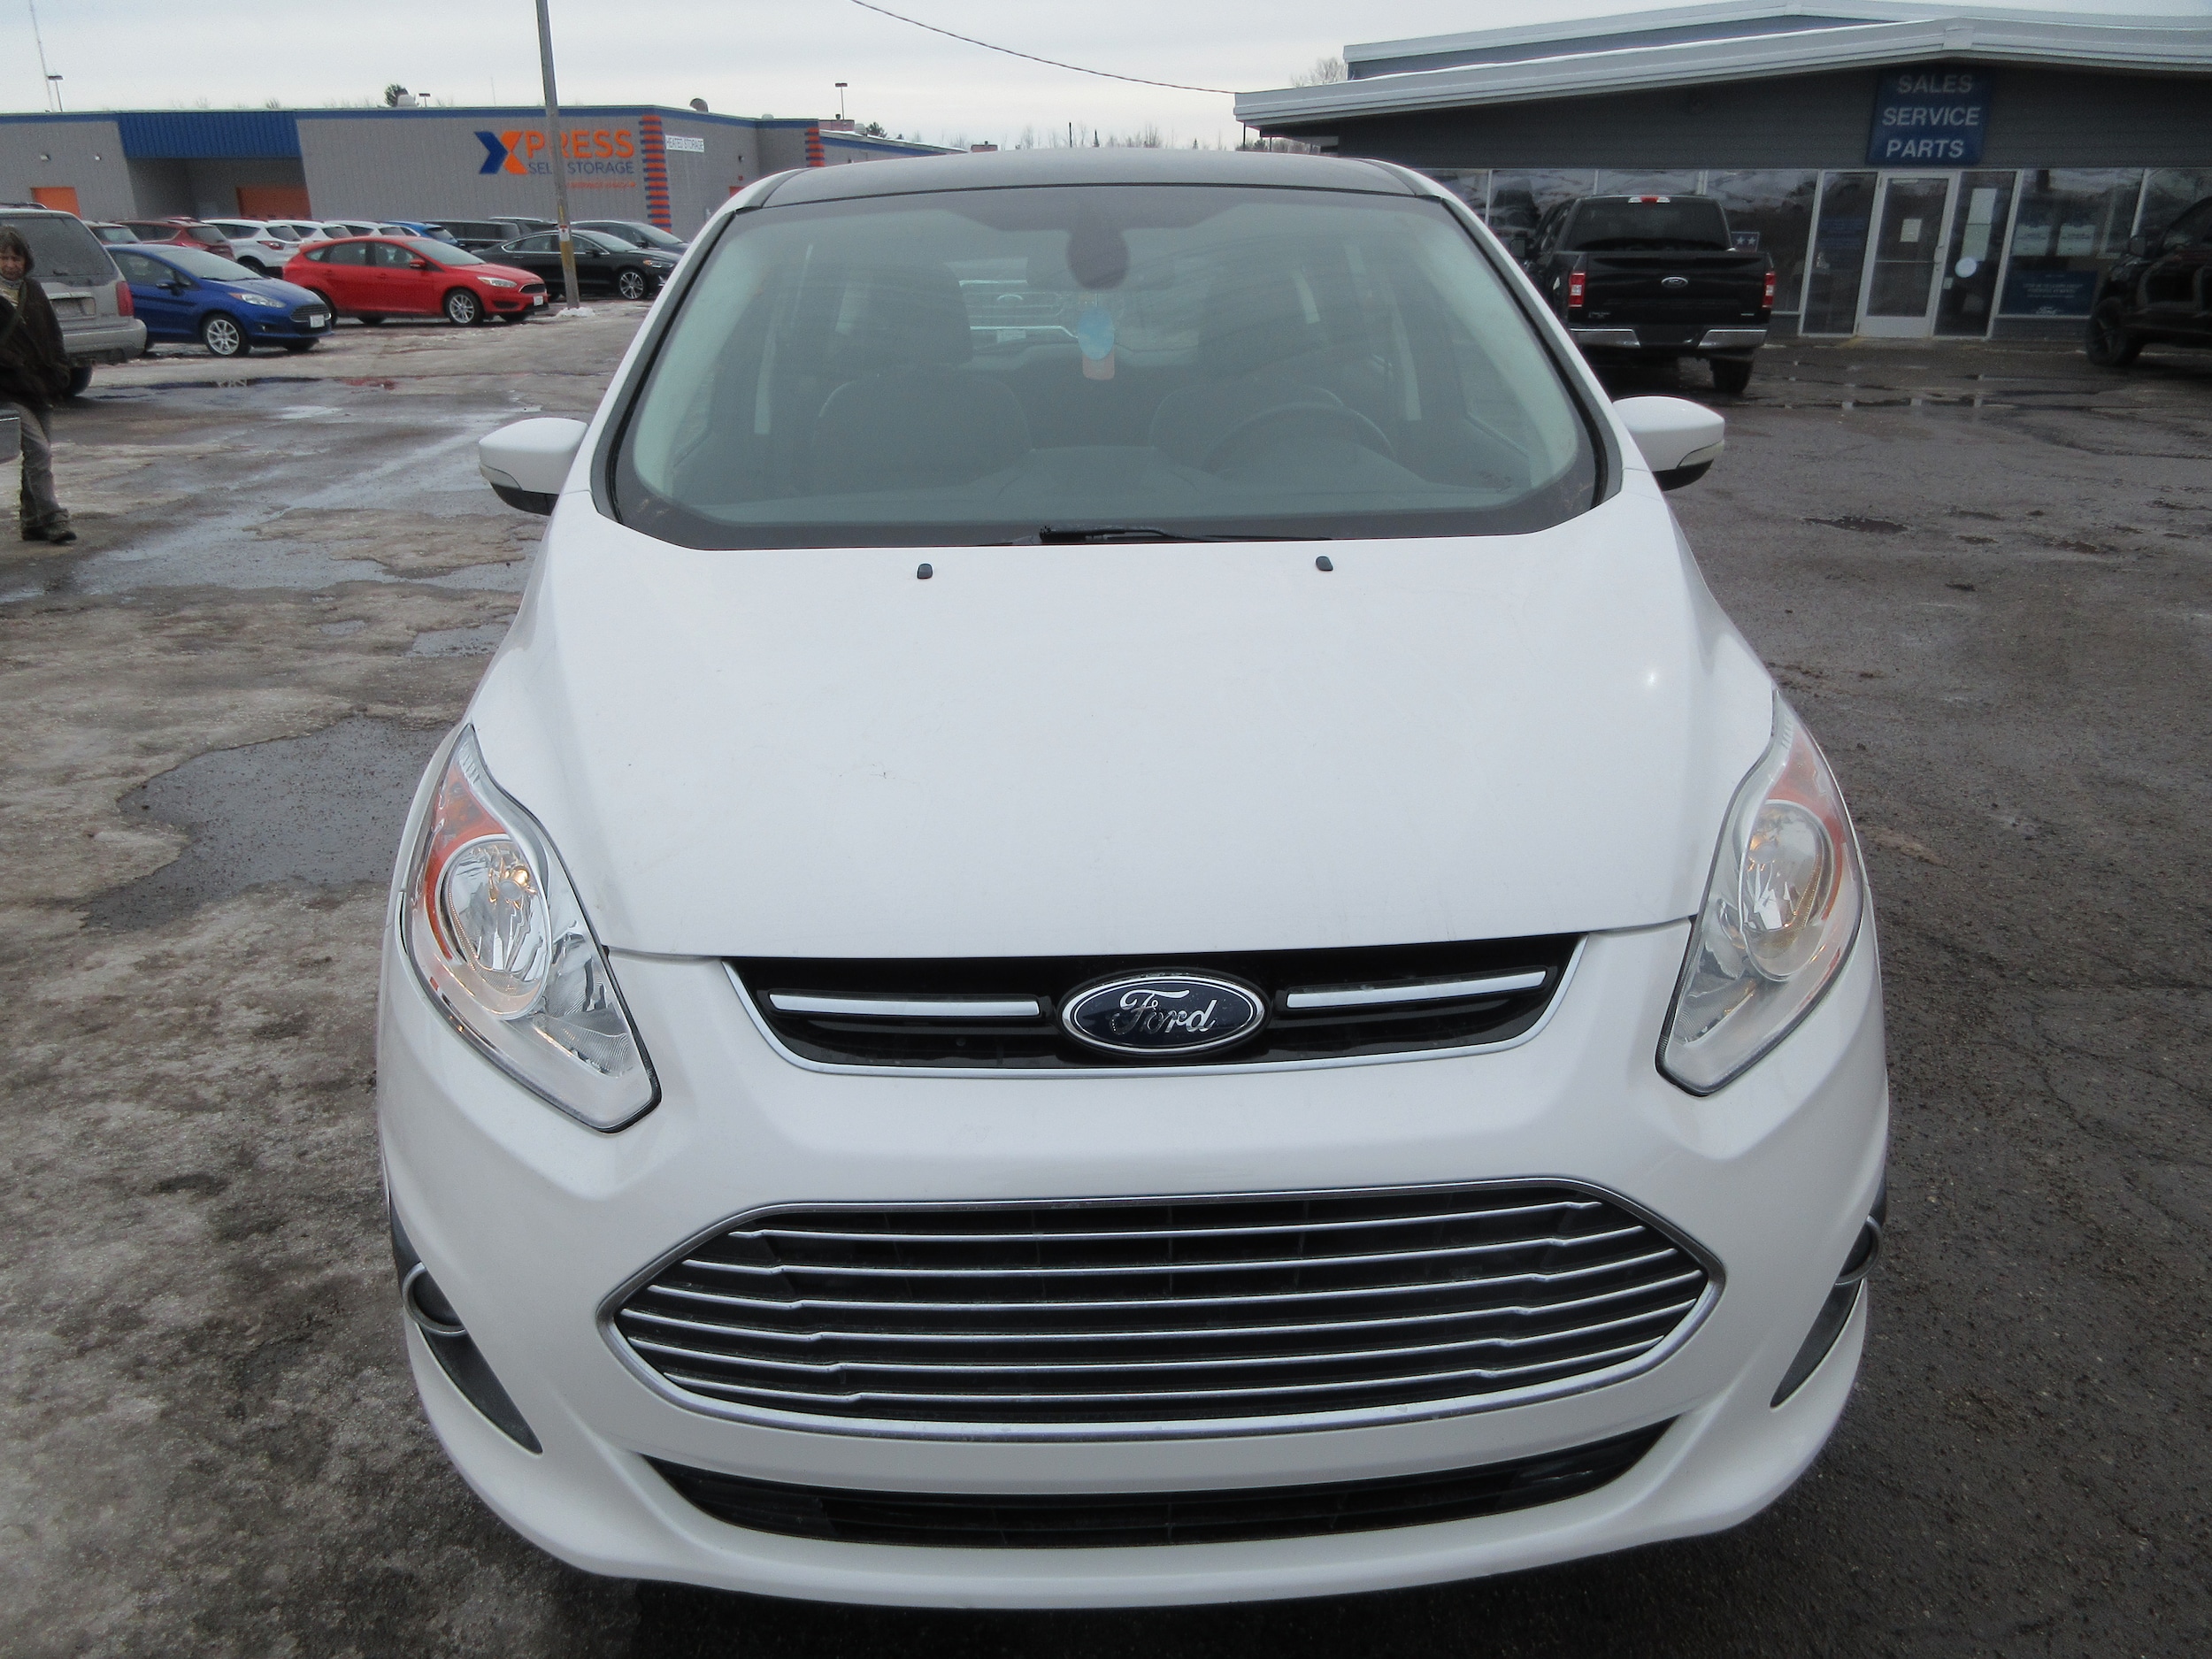 Used 15 Ford C Max Hybrid For Sale At Copper Country Ford Vin 1fadp5bu7fl